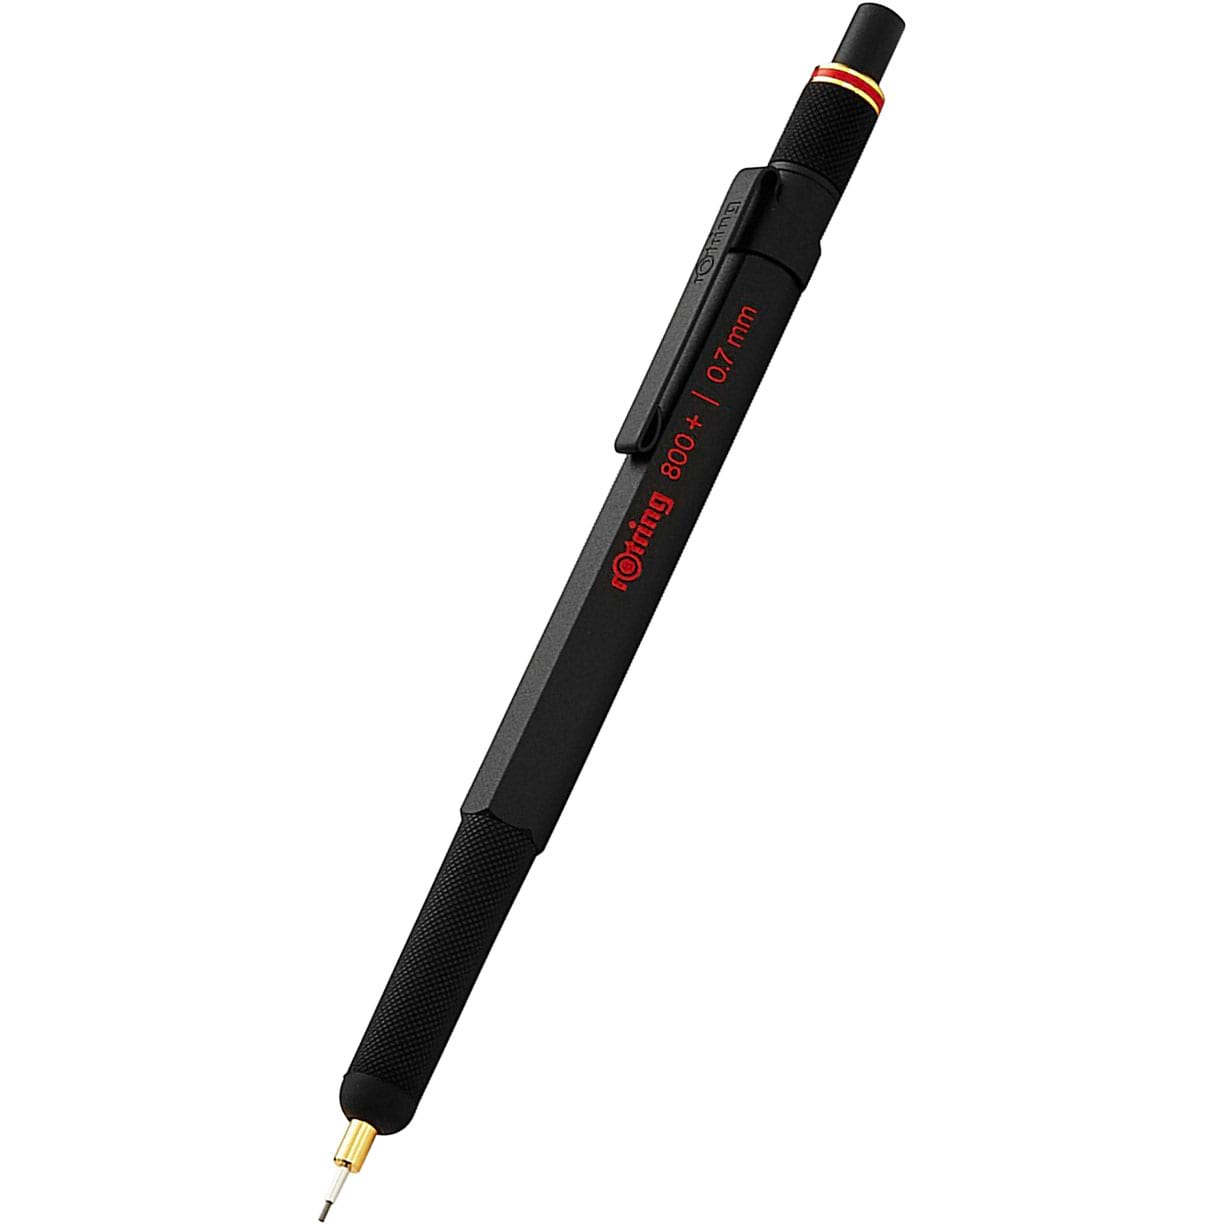 Rotring 800+ Mechanical Pencil and Stylus - 0.7mm Lead